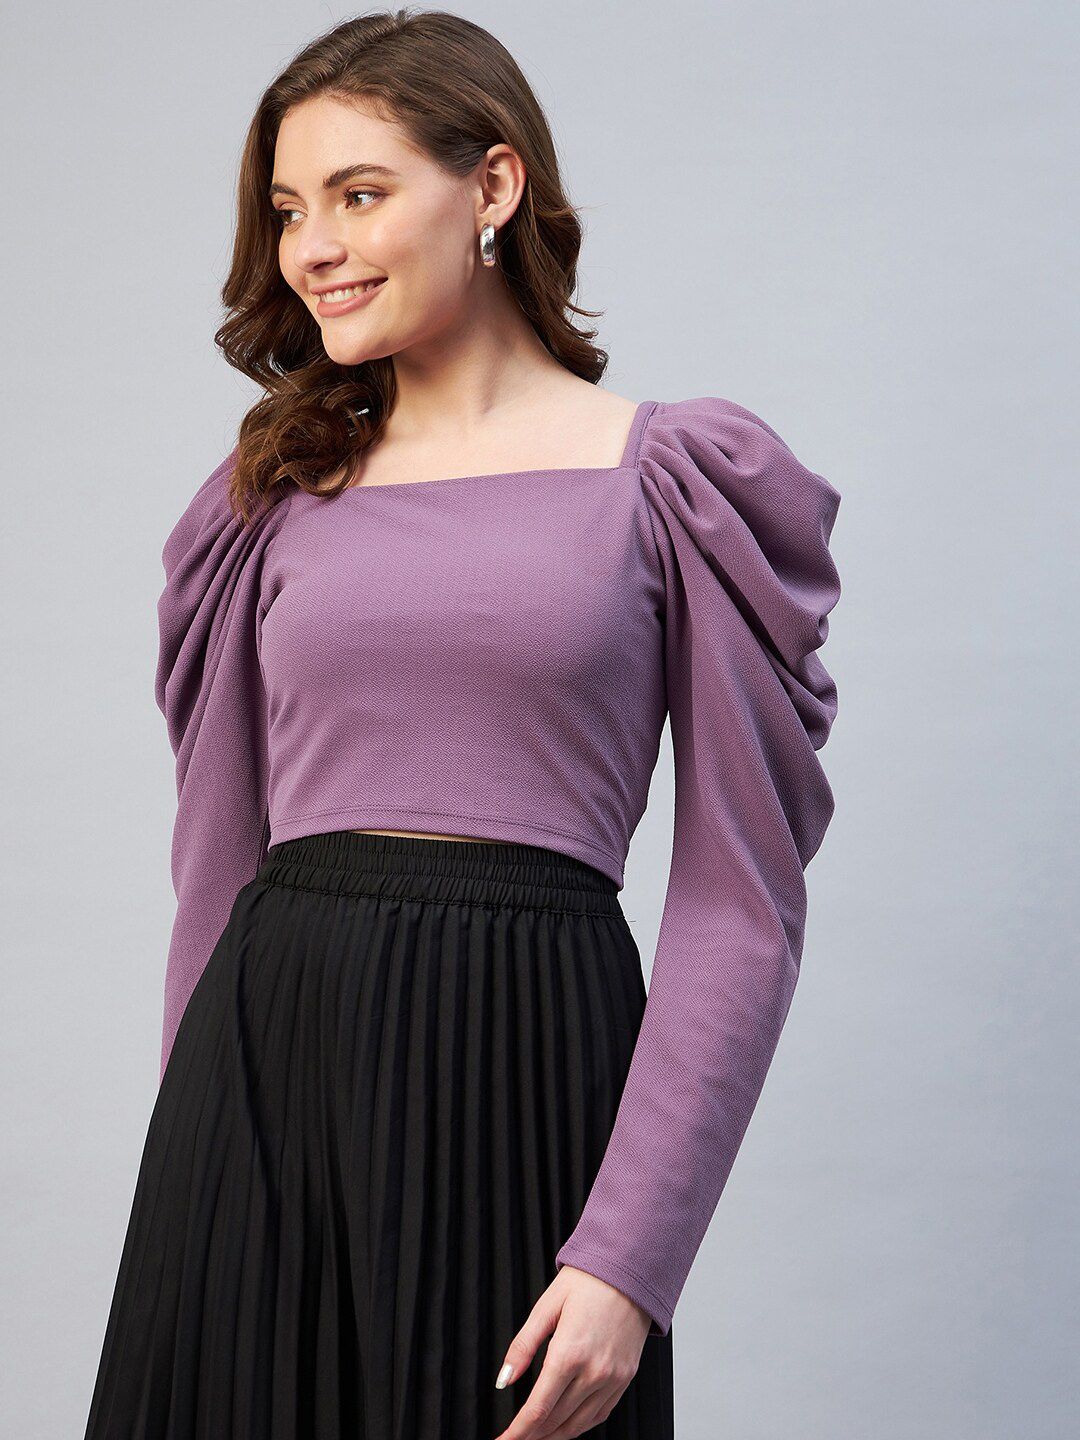 Marie Claire Lavender Puff Sleeves Crop Top Price in India